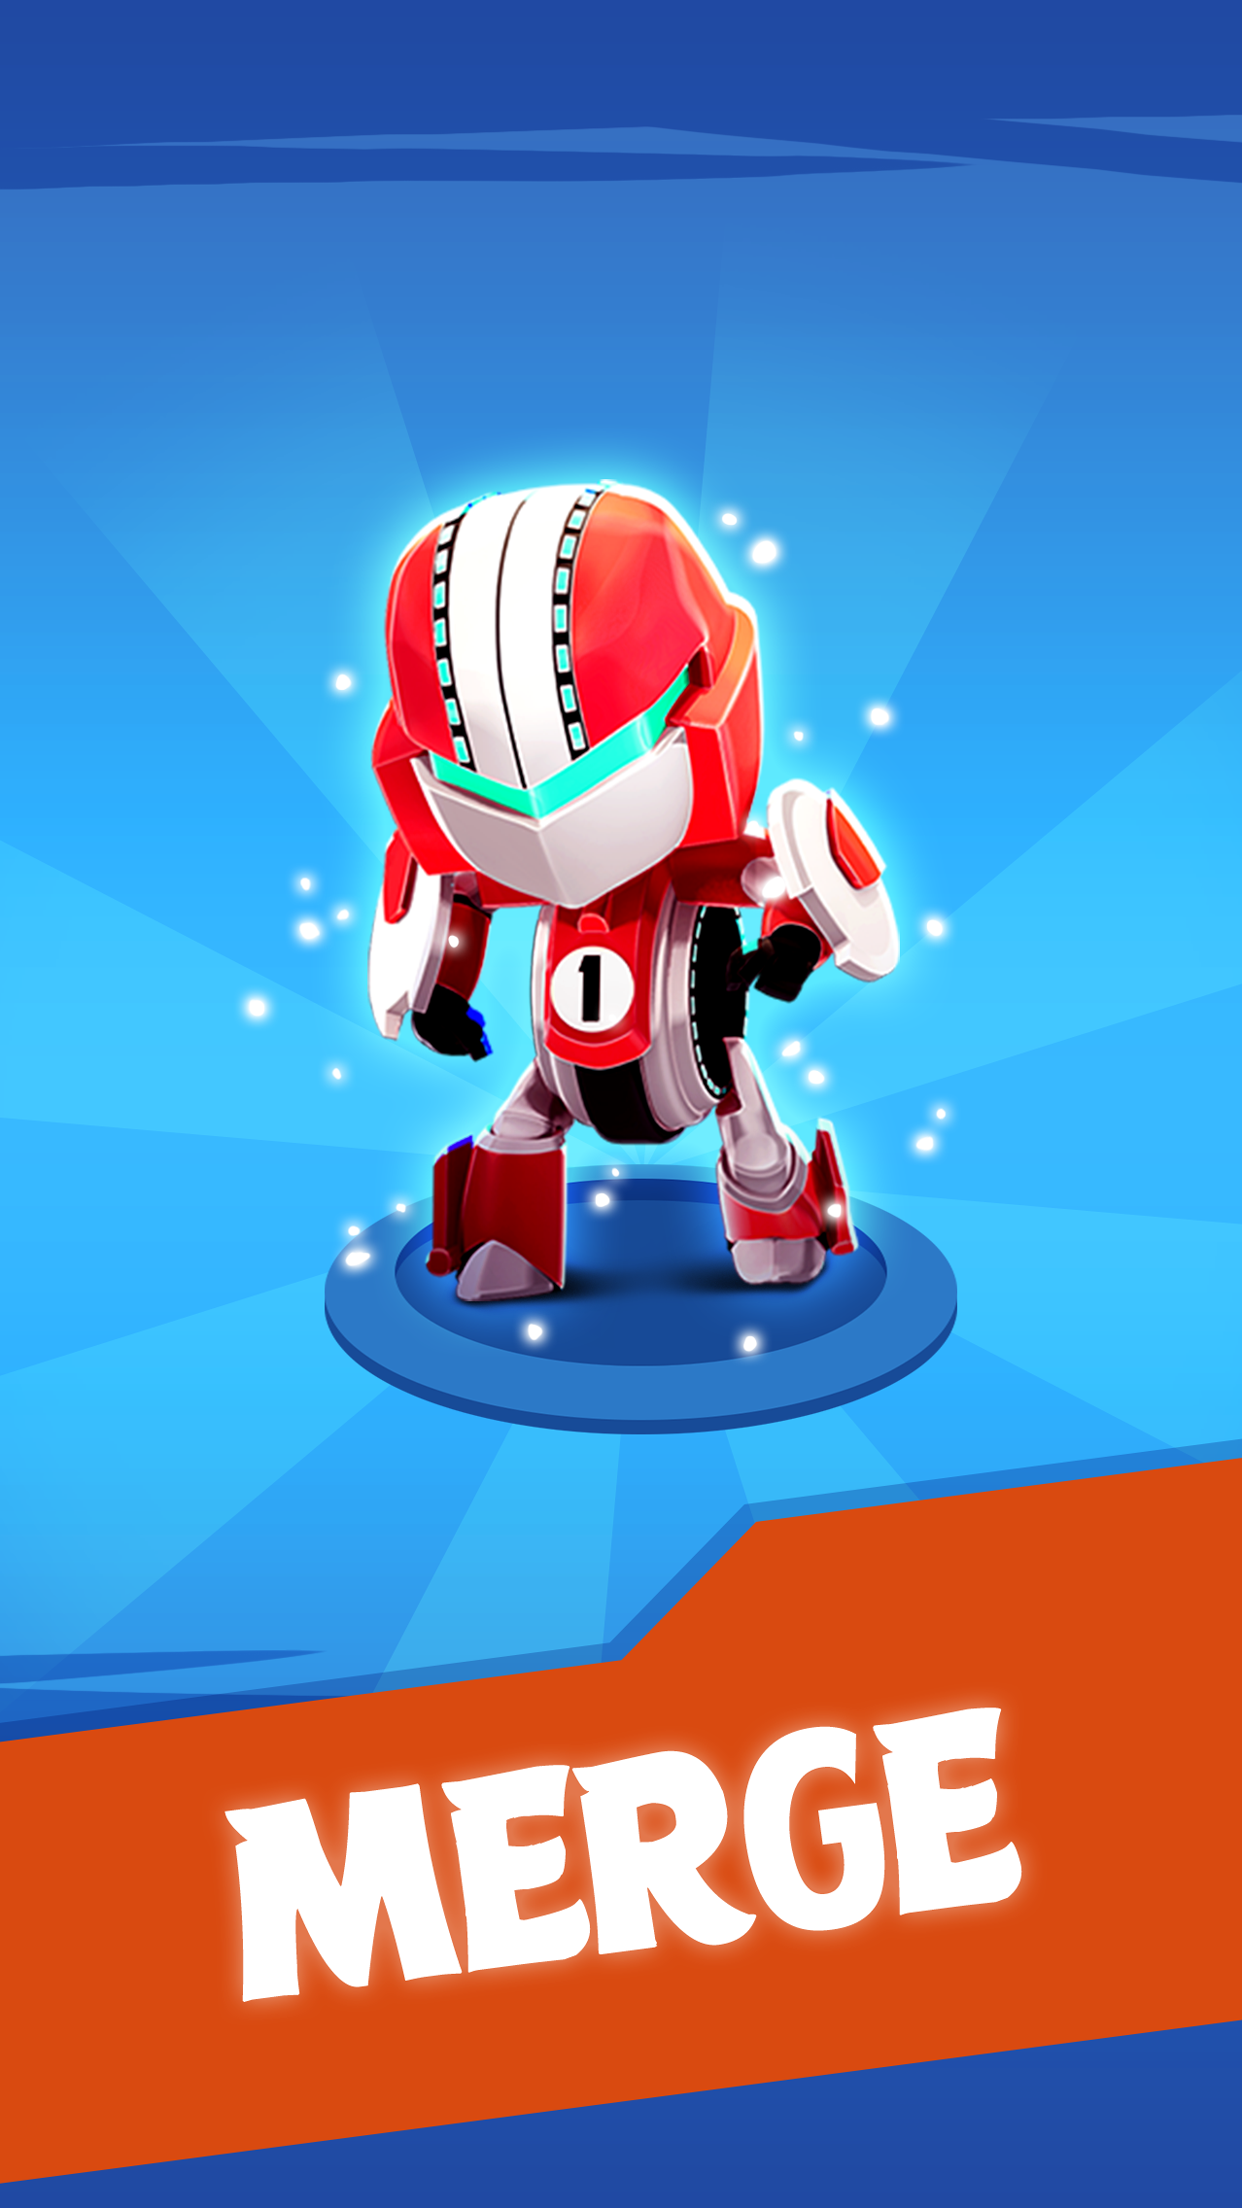 Merge Plane Robots - Idle Game APK 1.6.8 for Android – Download Merge Plane  Robots - Idle Game XAPK (APK Bundle) Latest Version from APKFab.com